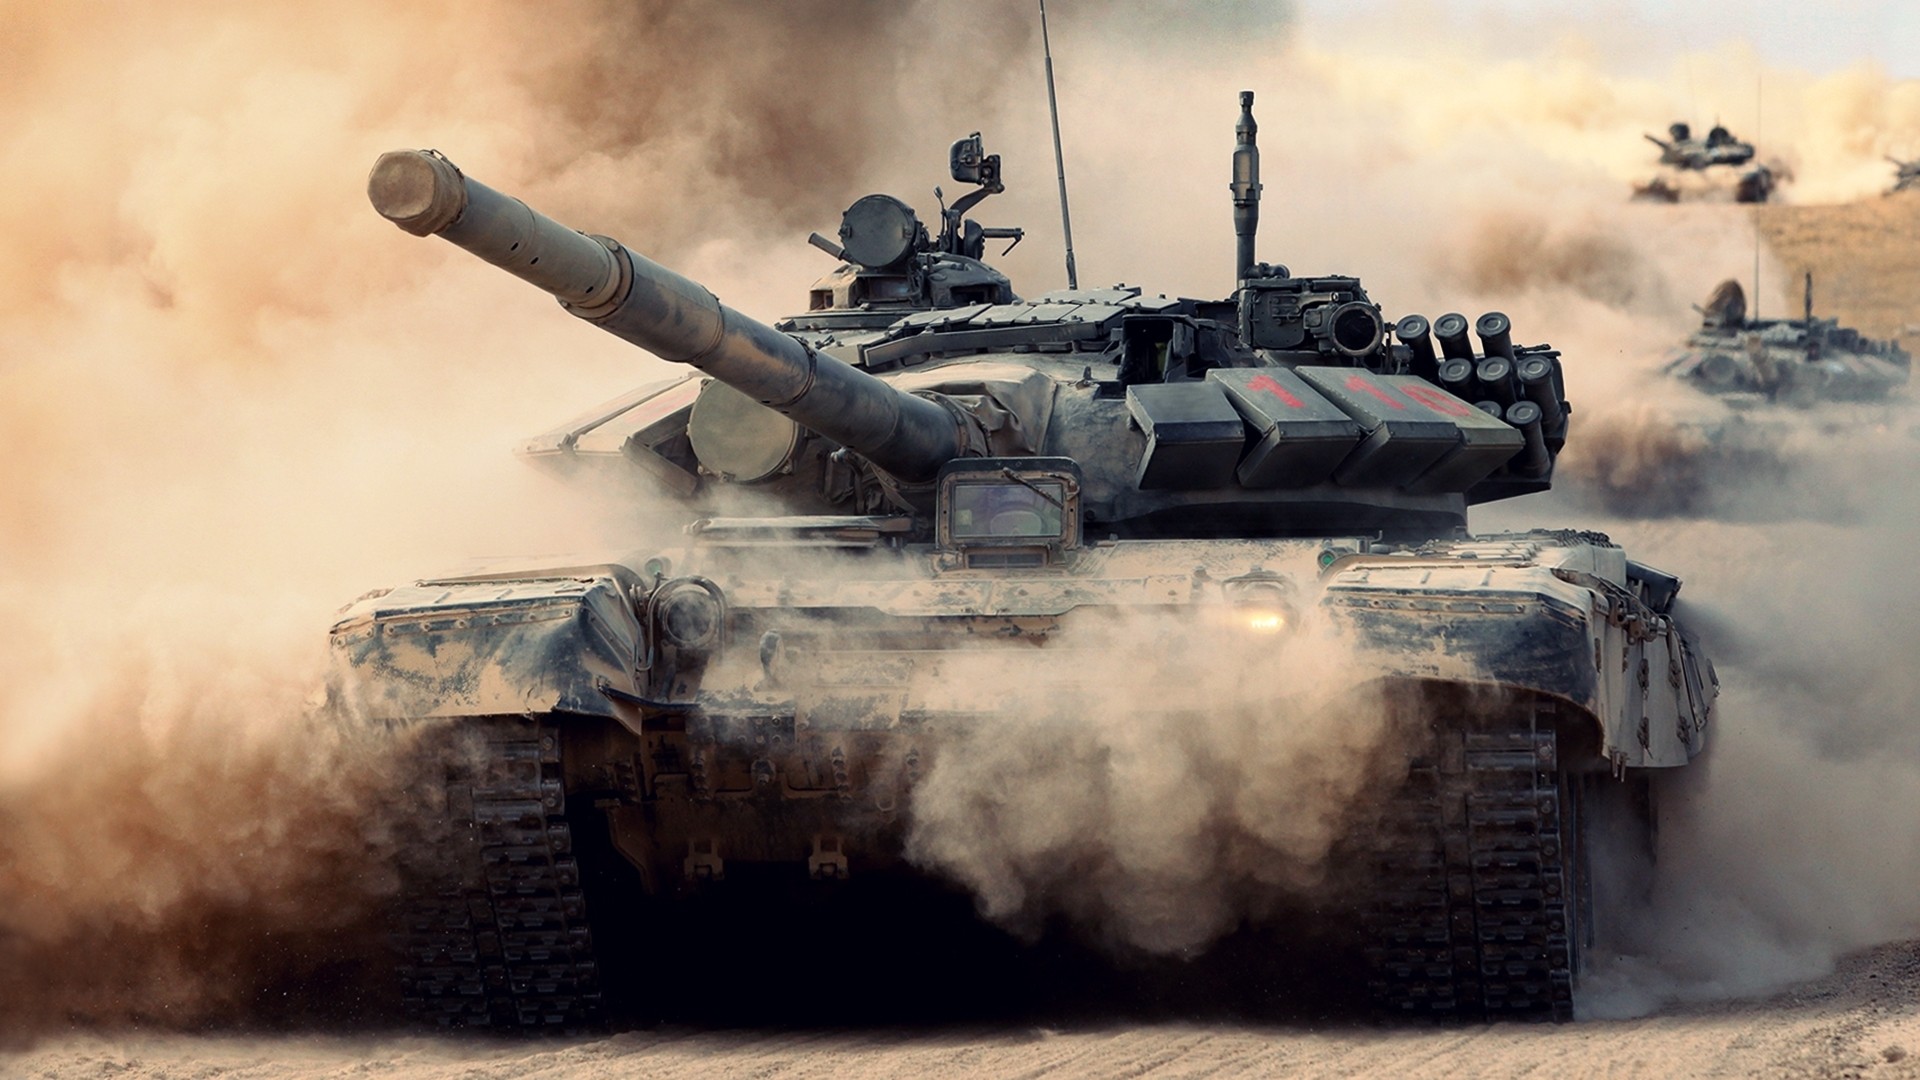 General 1920x1080 weapon tank T-90 dust brown sand military beige military vehicle vehicle Russian Army